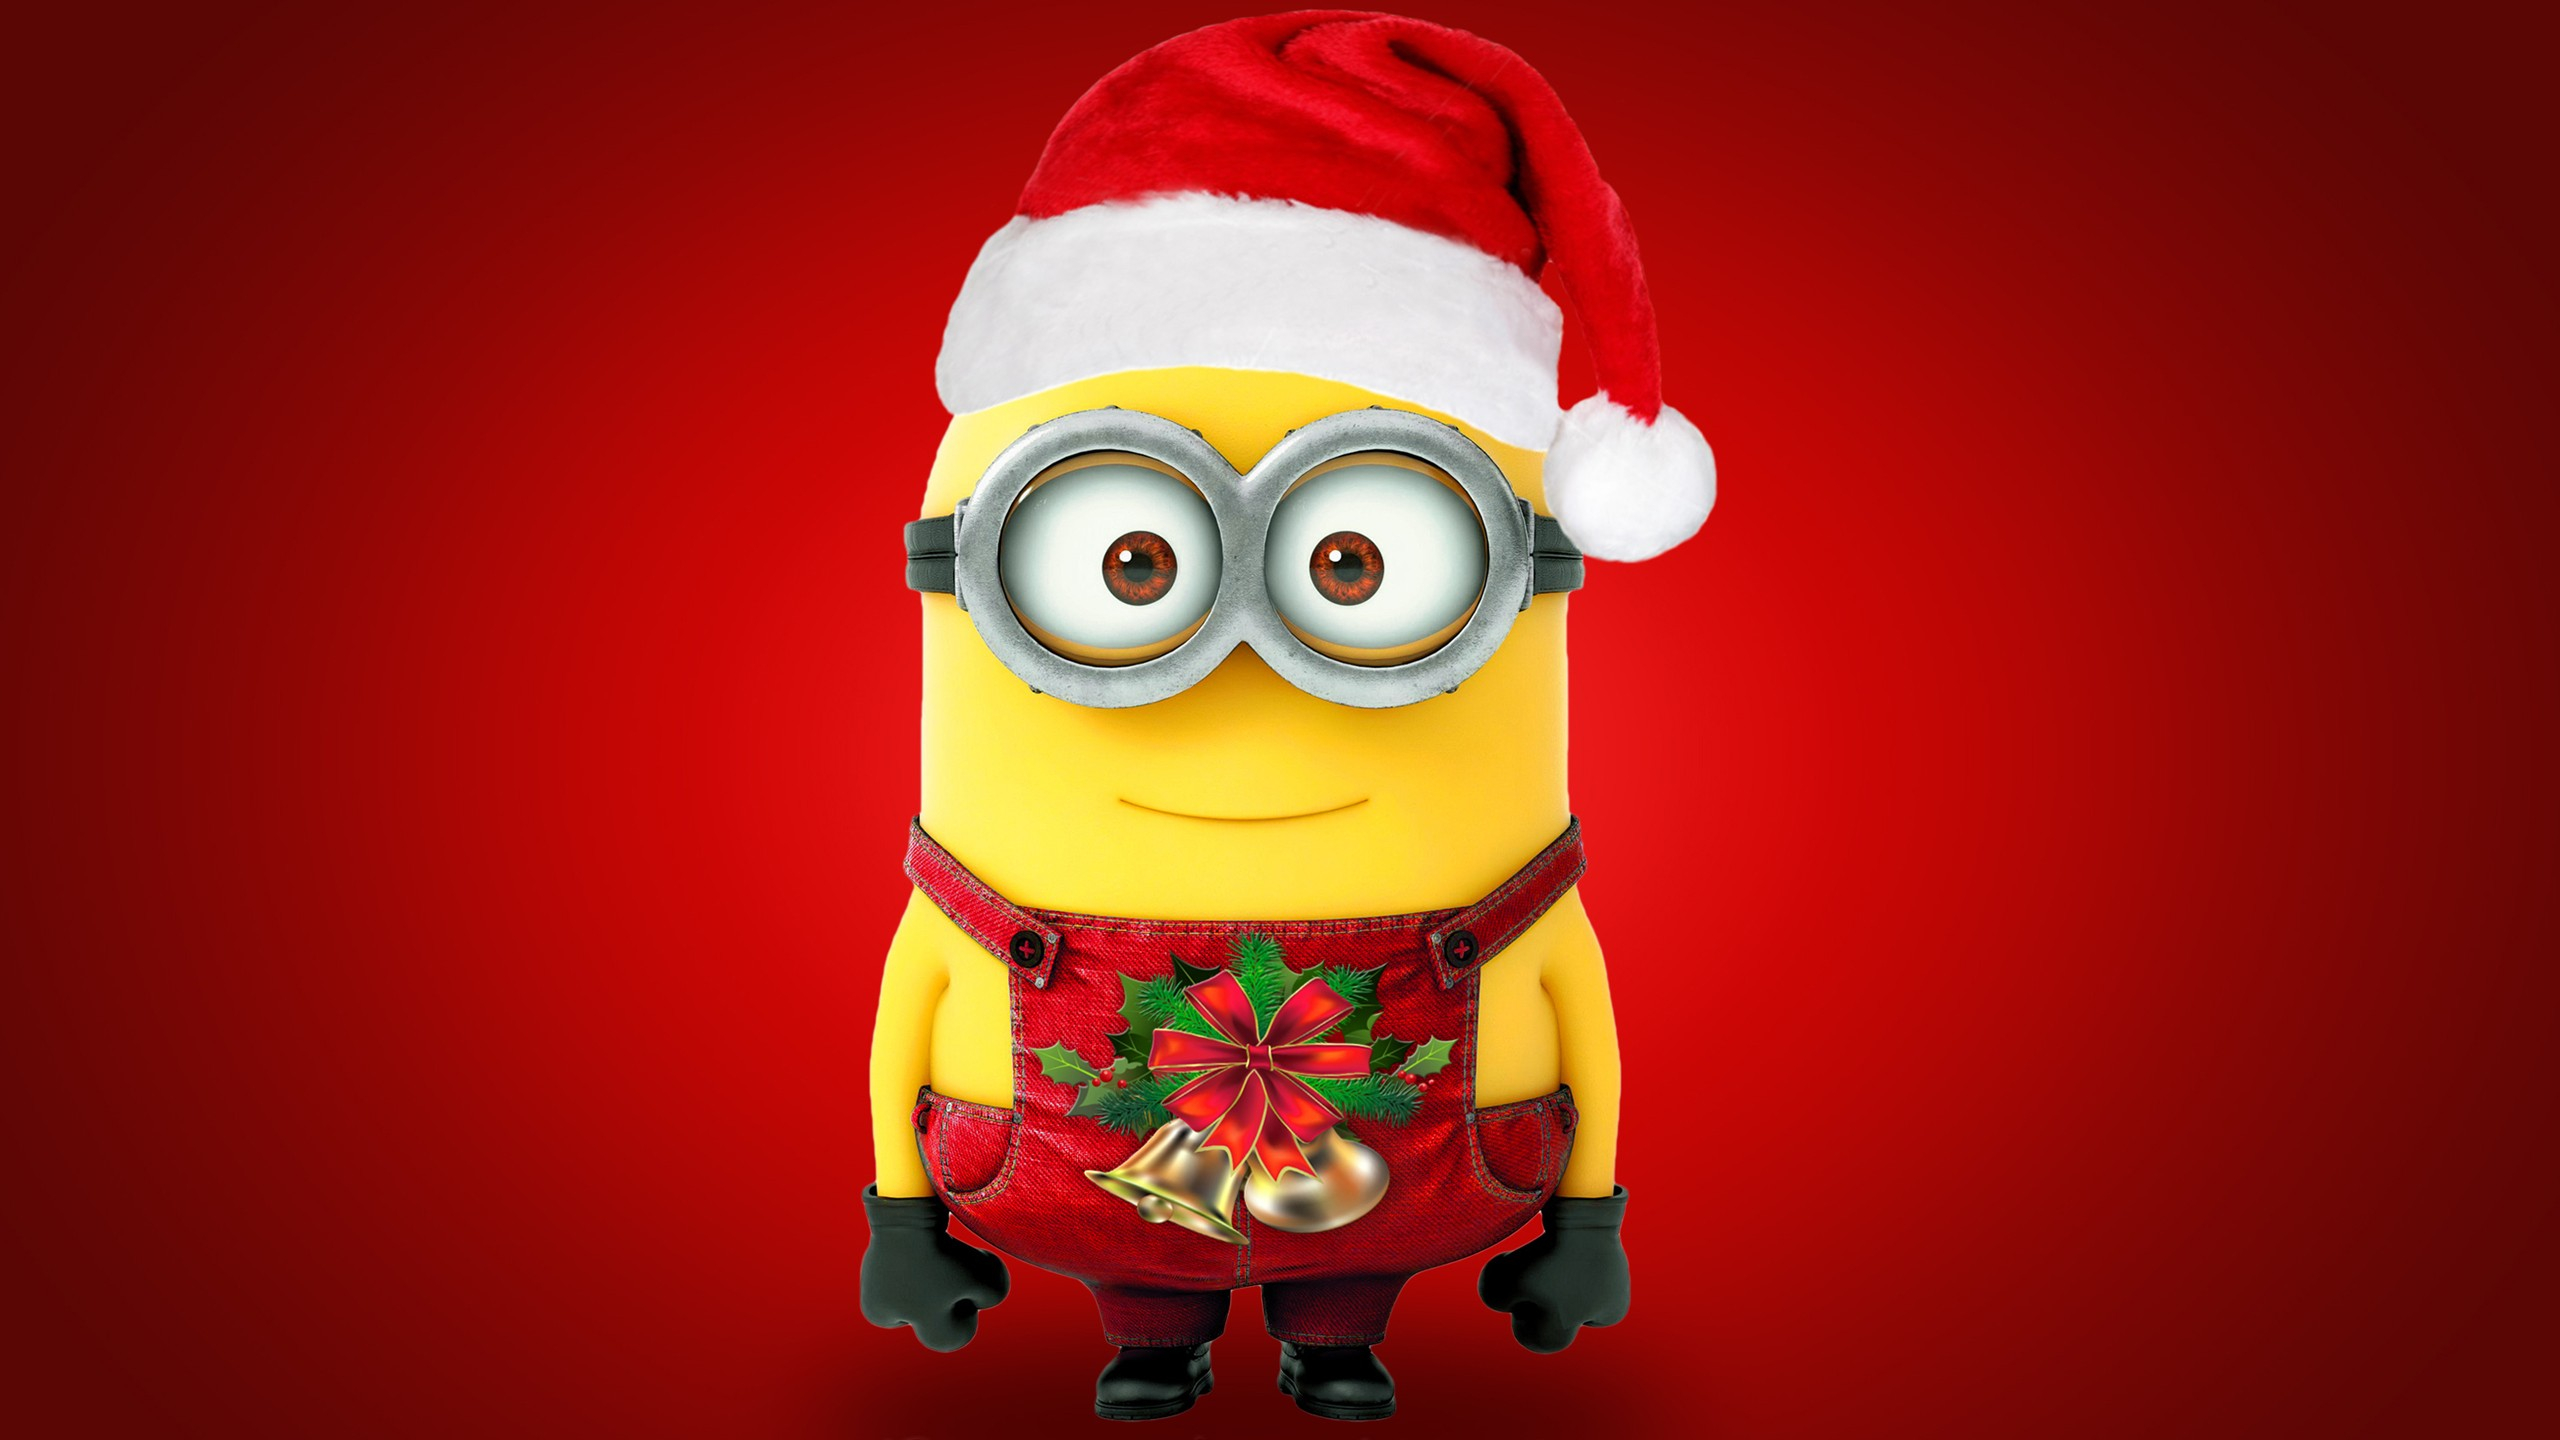 2560x1440 Wallpaper : illustration, red background, cartoon, Christmas, Toy, Santa Claus, minions, Despicable Me Miragrok 180379 HD Wallpapers